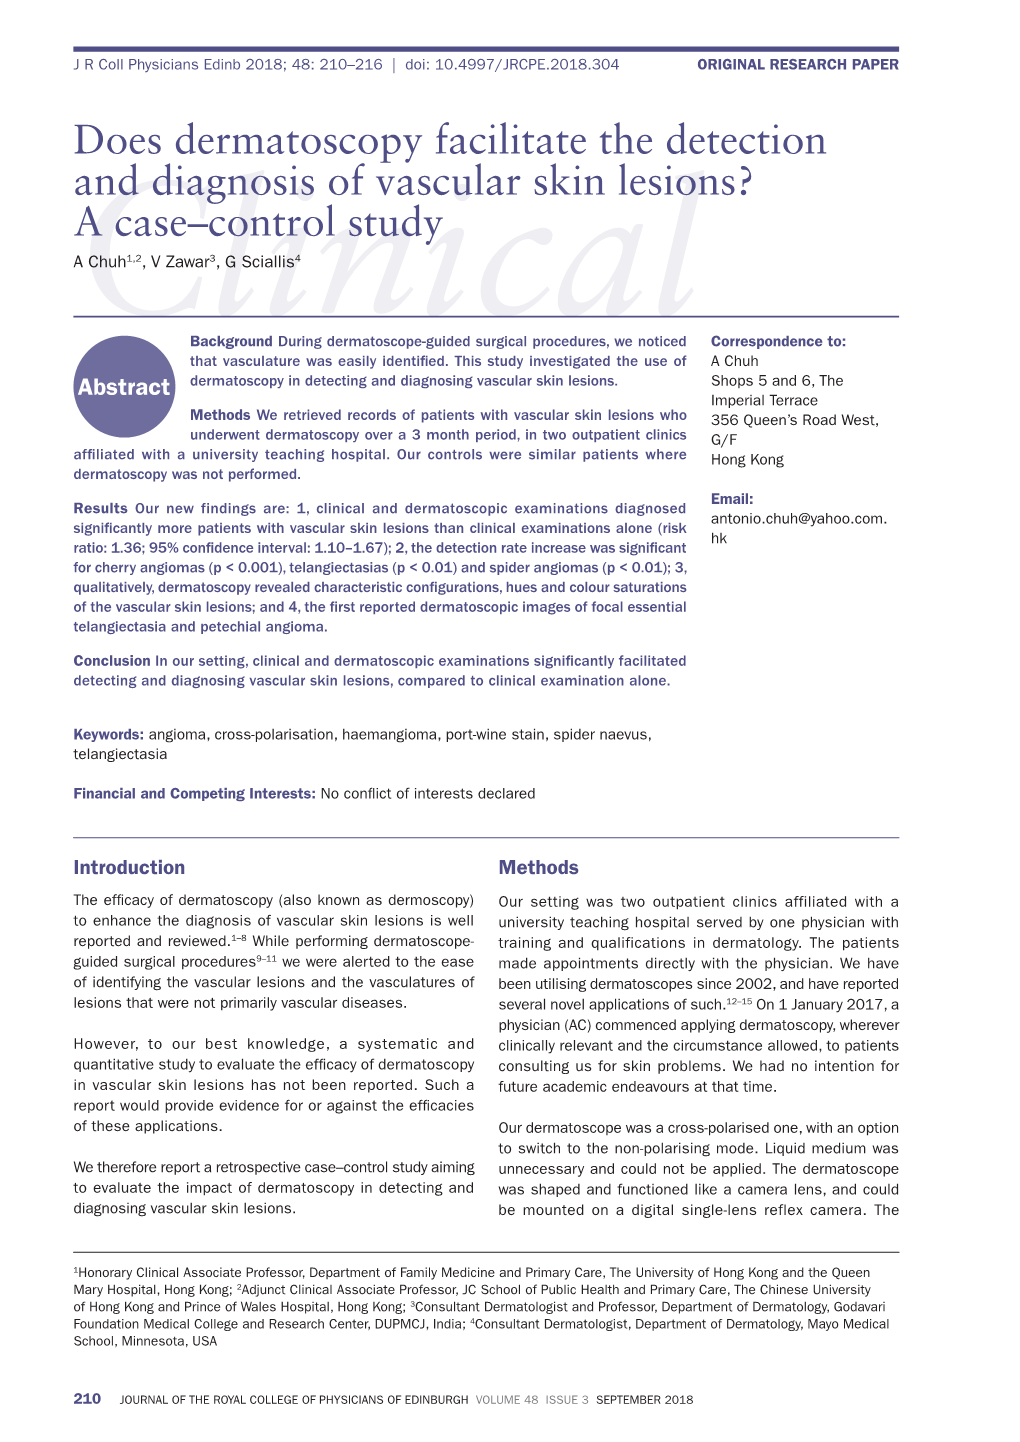 Does Dermatoscopy Facilitate the Detection and Diagnosis of Vascular Skin Lesions? a Case–Control Study a Chuh1,2, V Zawar3, G Sciallis4